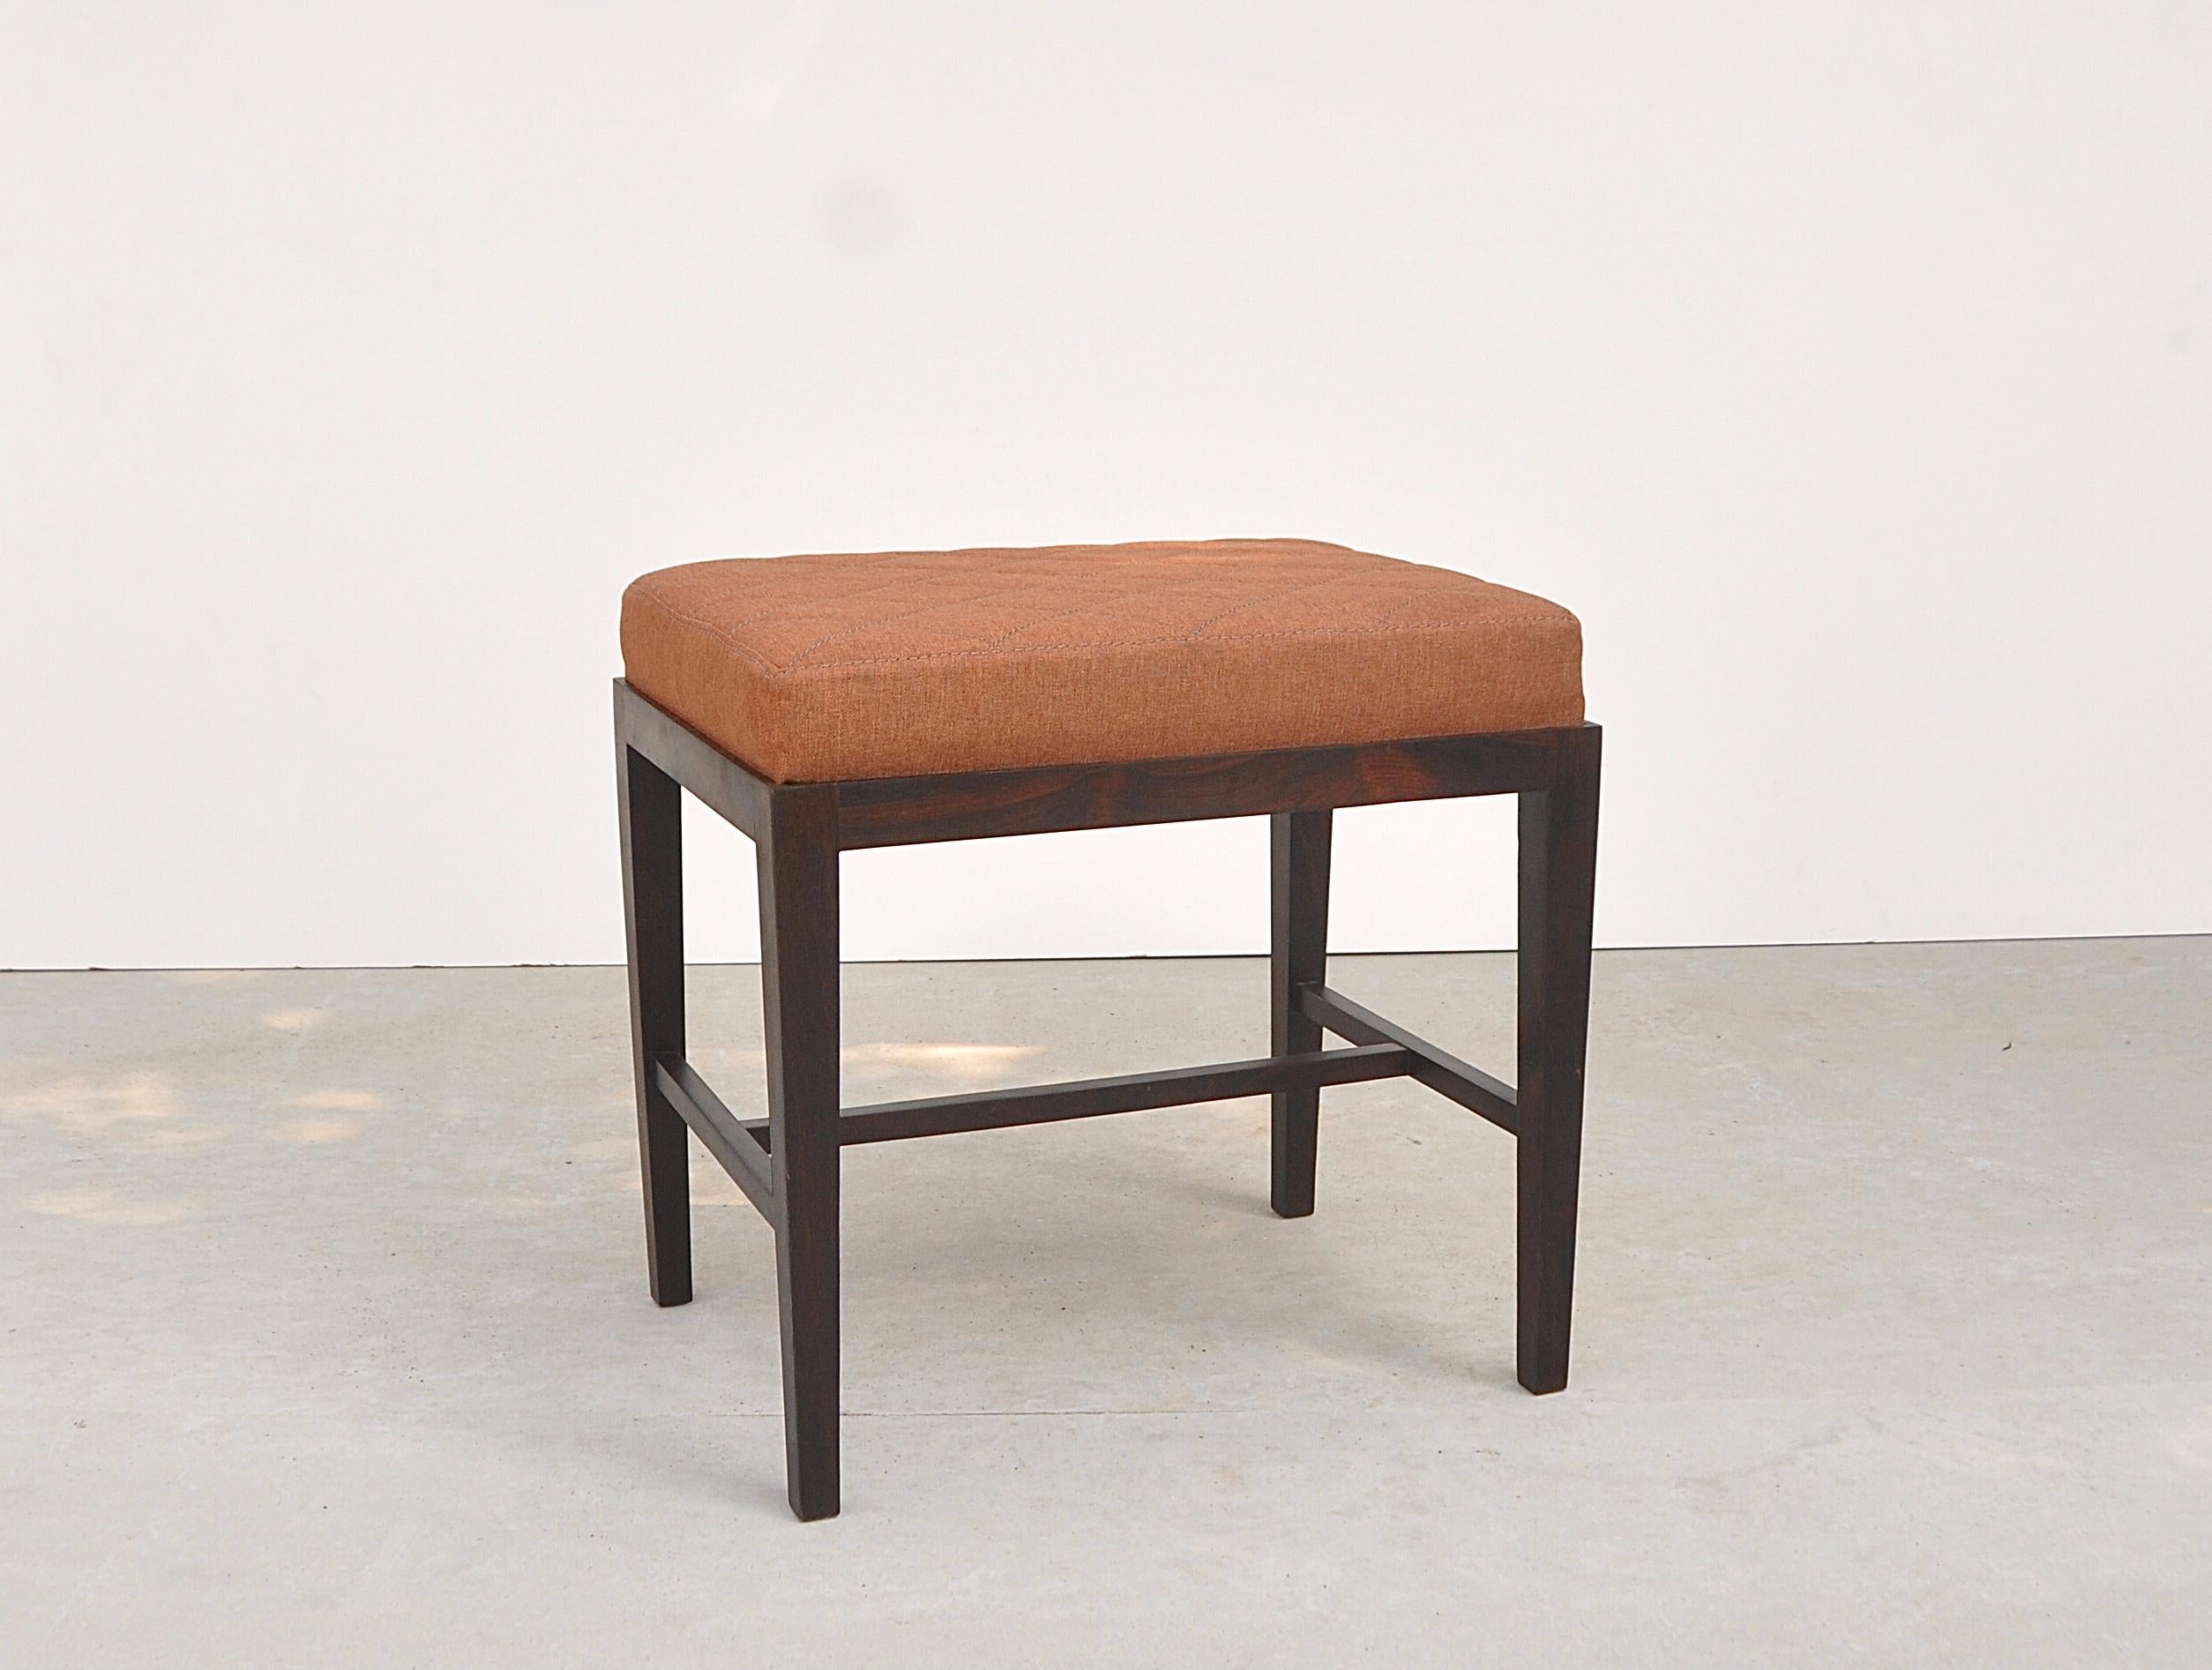 Brazilian upholstered stool with structure in solid rosewood by unknown author.